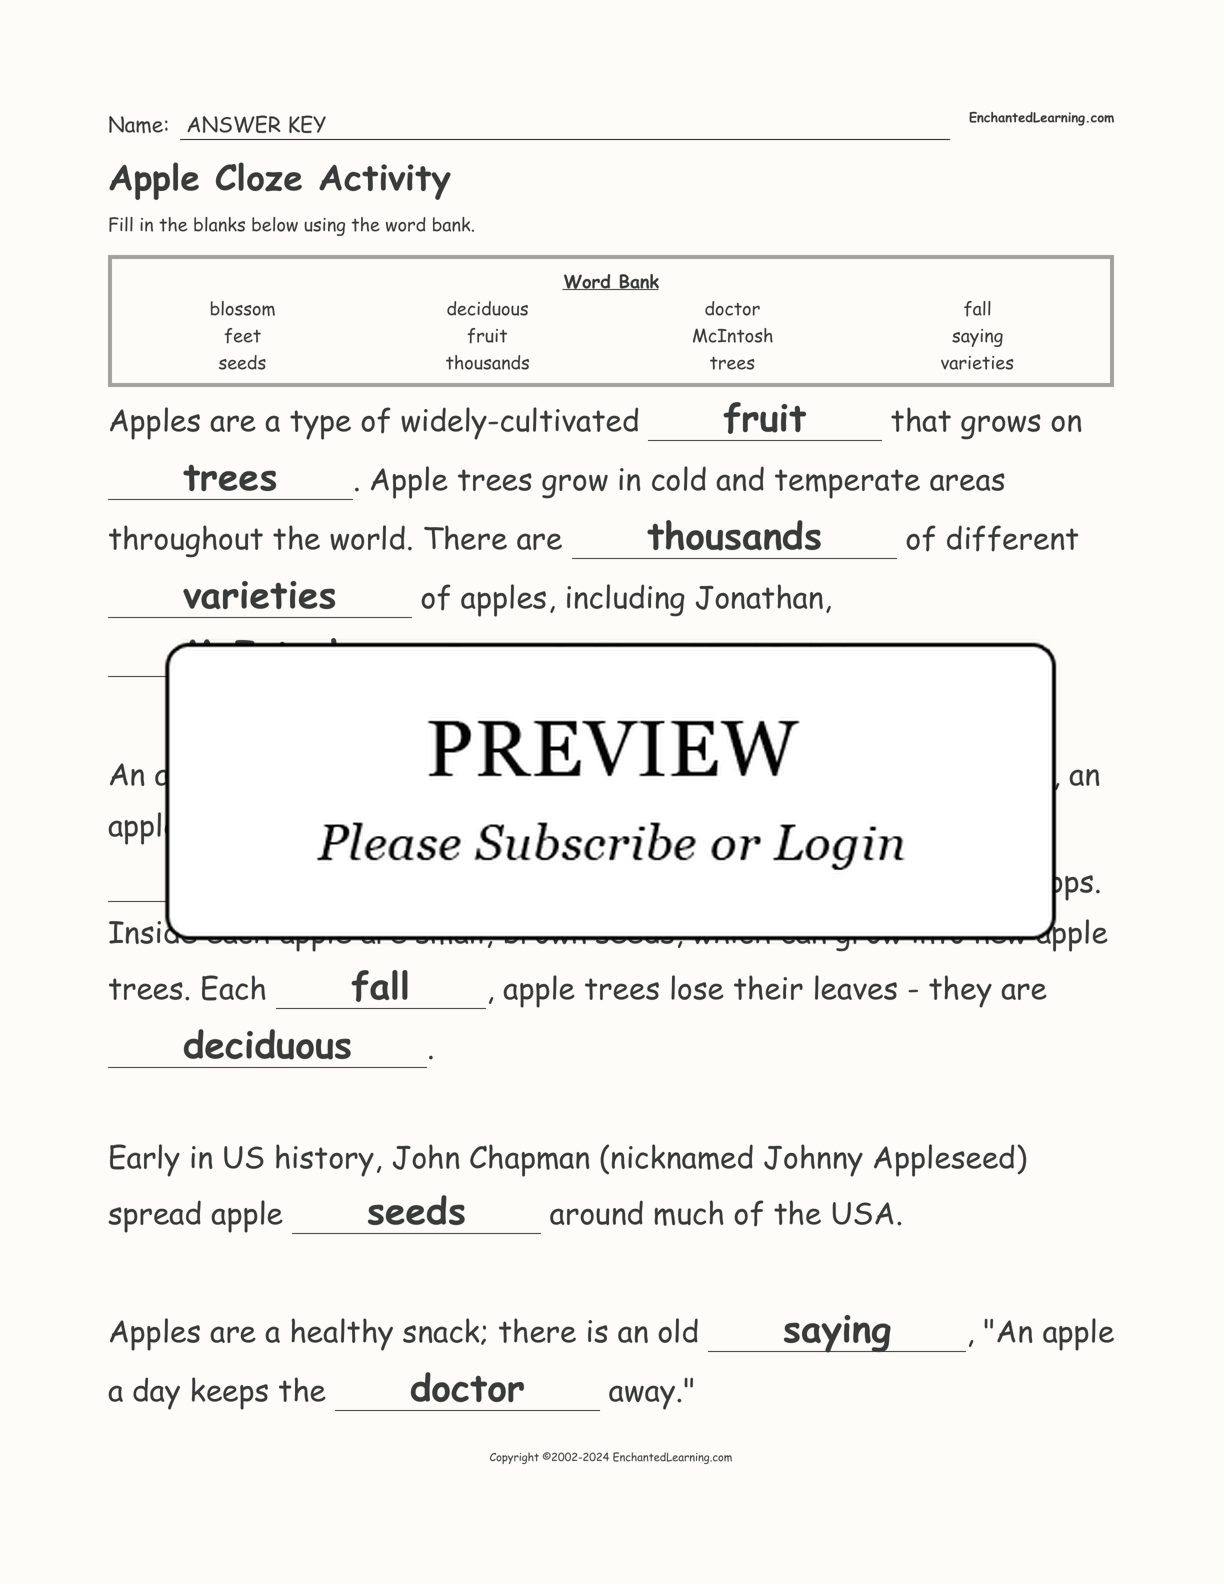 Apple Cloze Activity interactive worksheet page 2